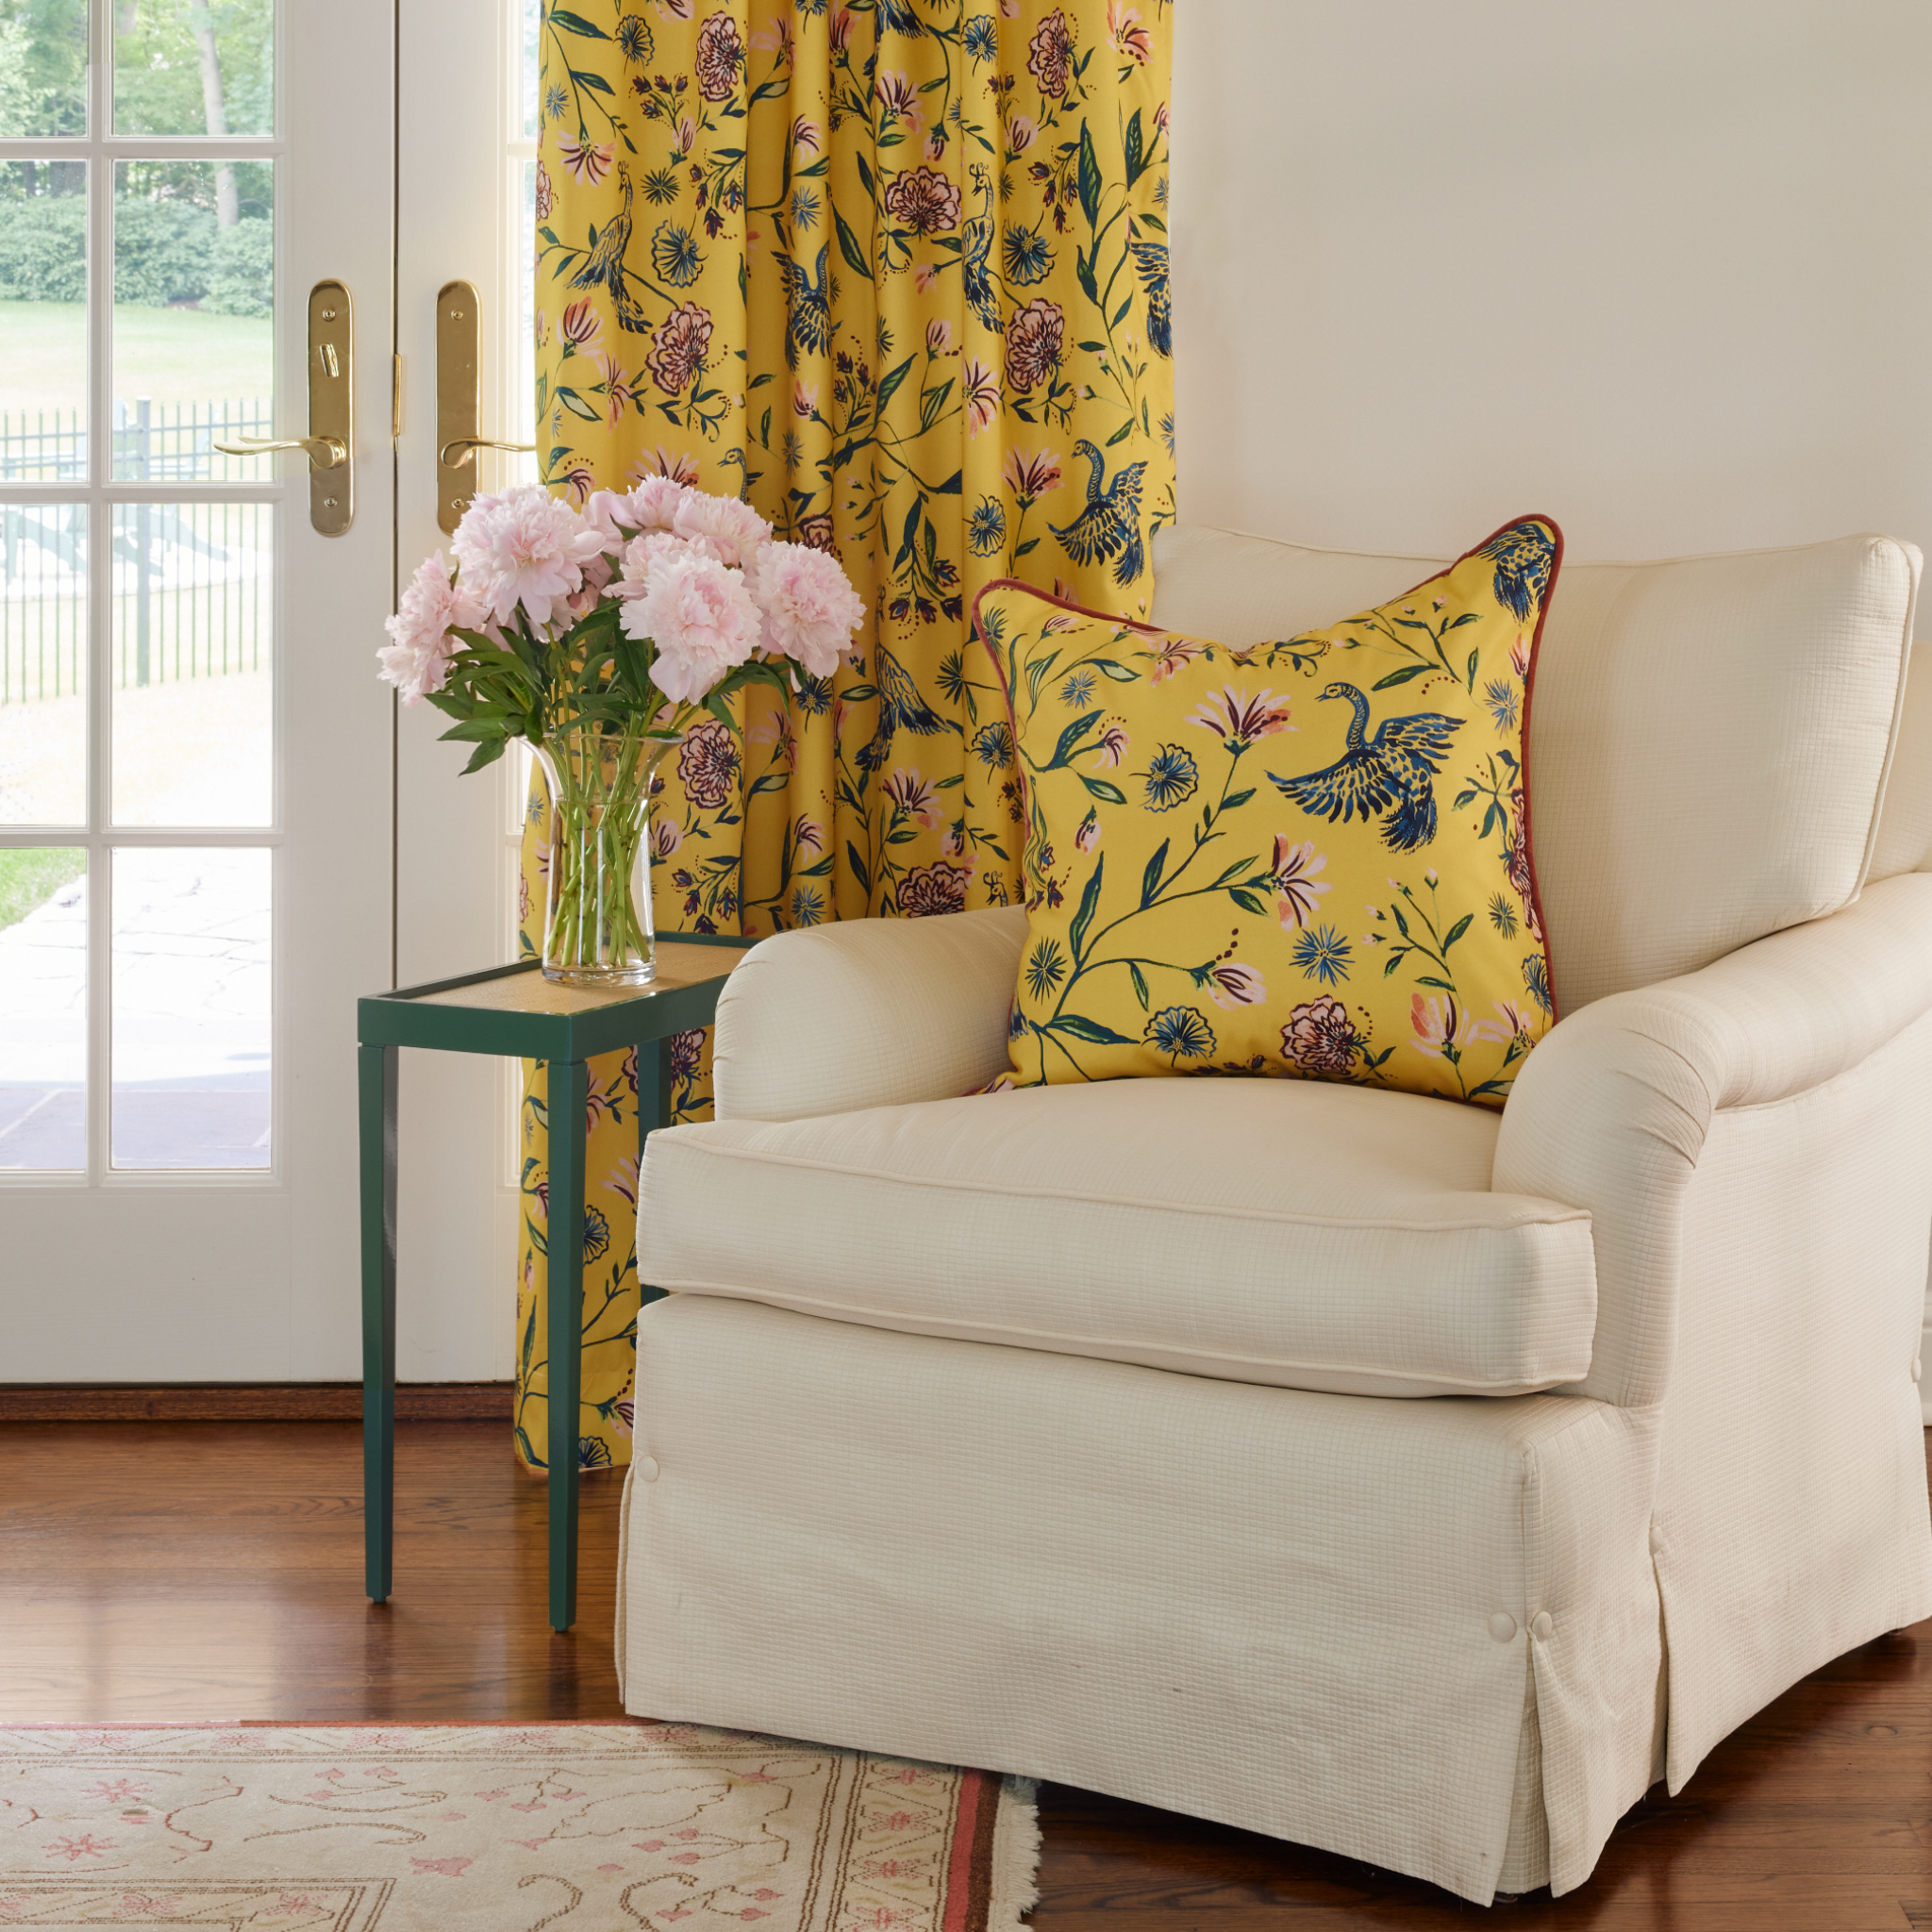 Yellow Chinoiserie printed curtains styled on living room with white arm chair styled with Yellow Chinoiserie printed pillow next to small green table with vase on top full of pink flowers